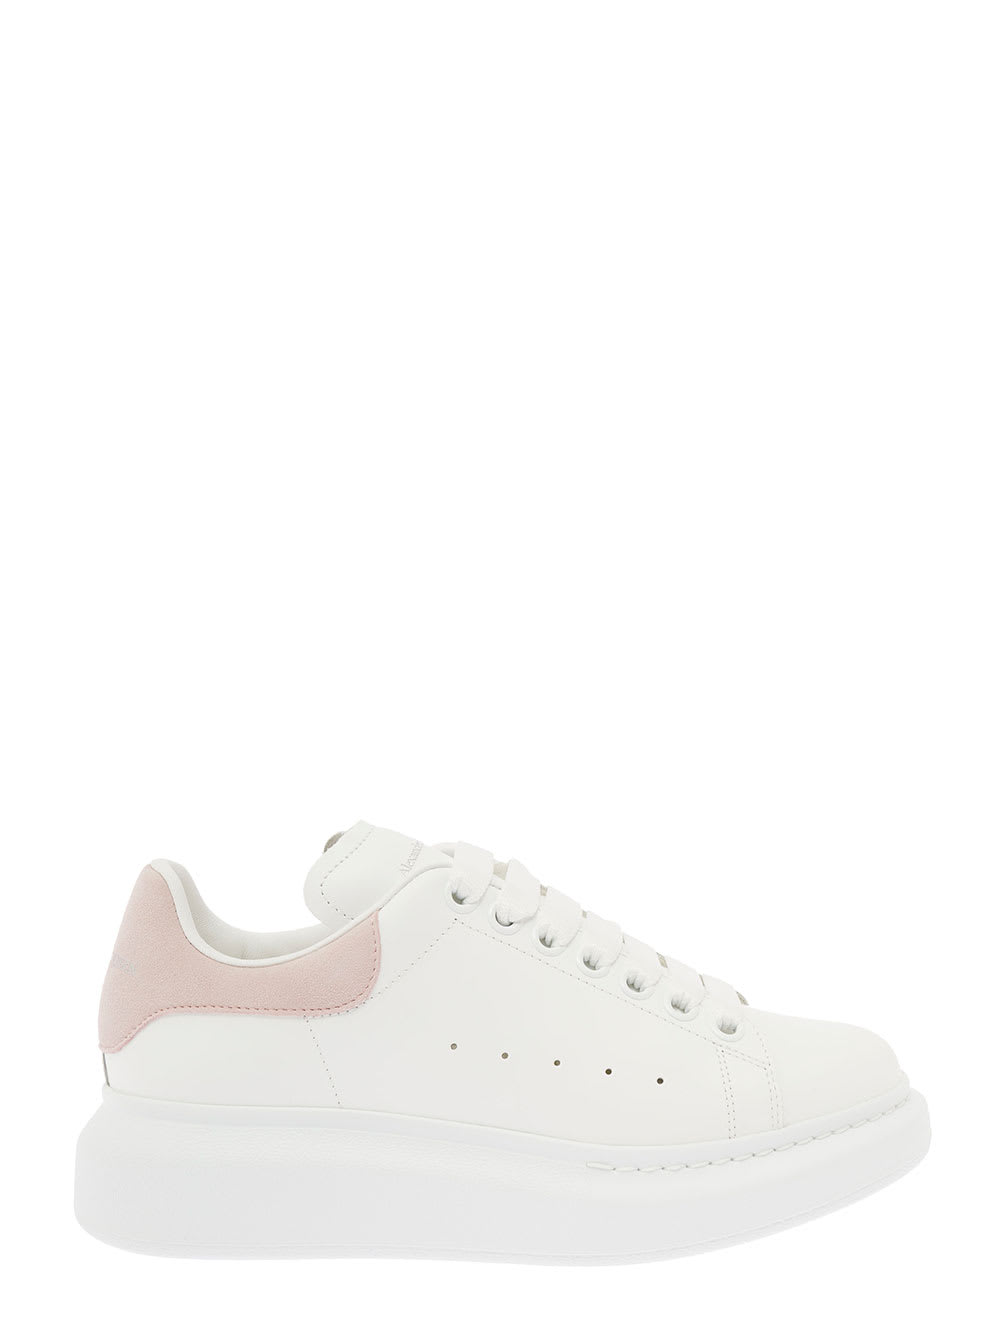 Alexander Mcqueen Womans Oversize White And Pink Leather Sneakers